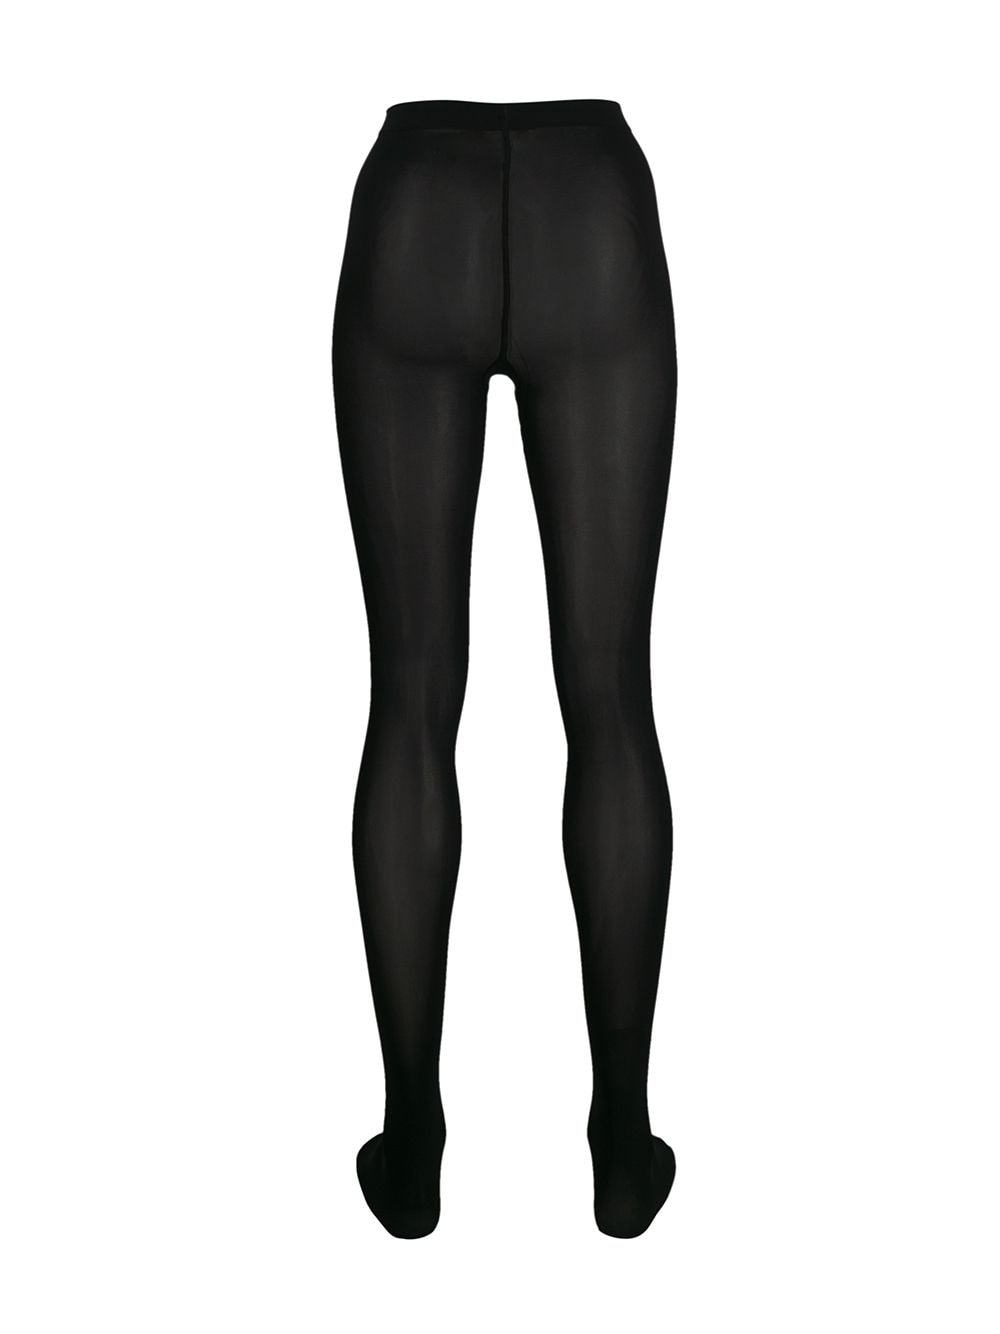 Wolford Deluxe 50 Tights - Farfetch